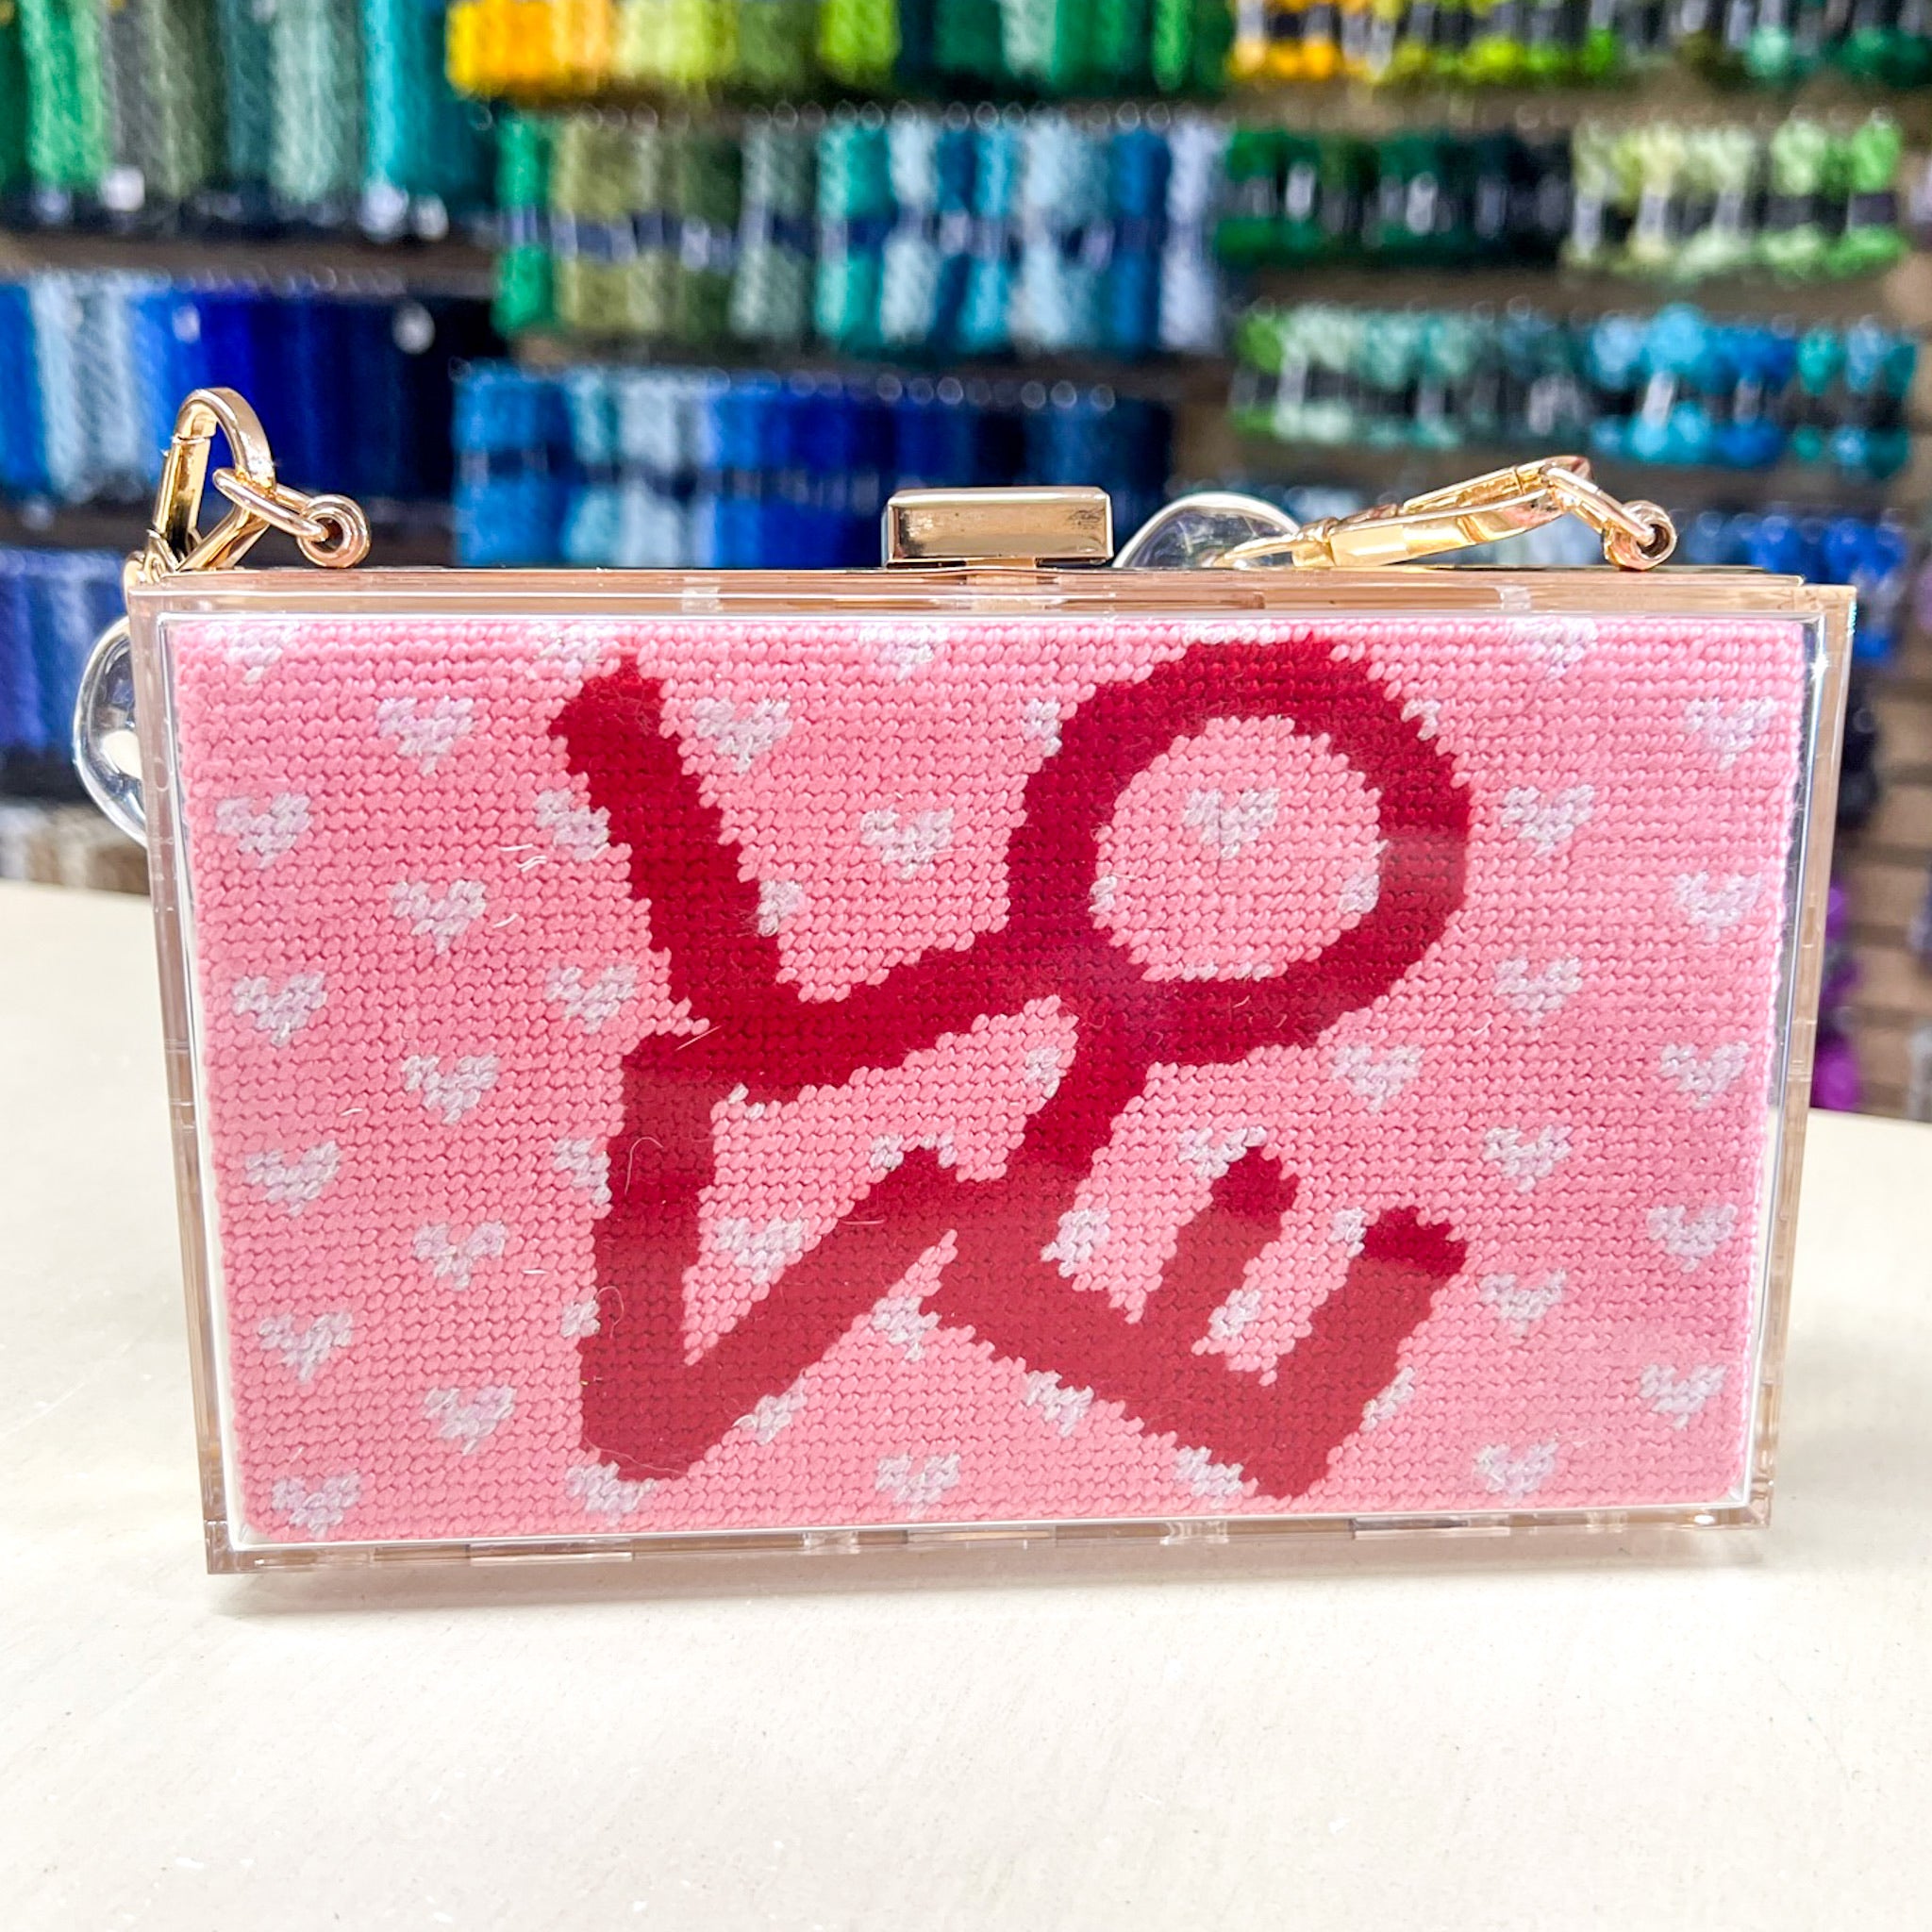 Louis Vuitton Key Pouch in Stardust Pink JAPAN EXCLUSIVE